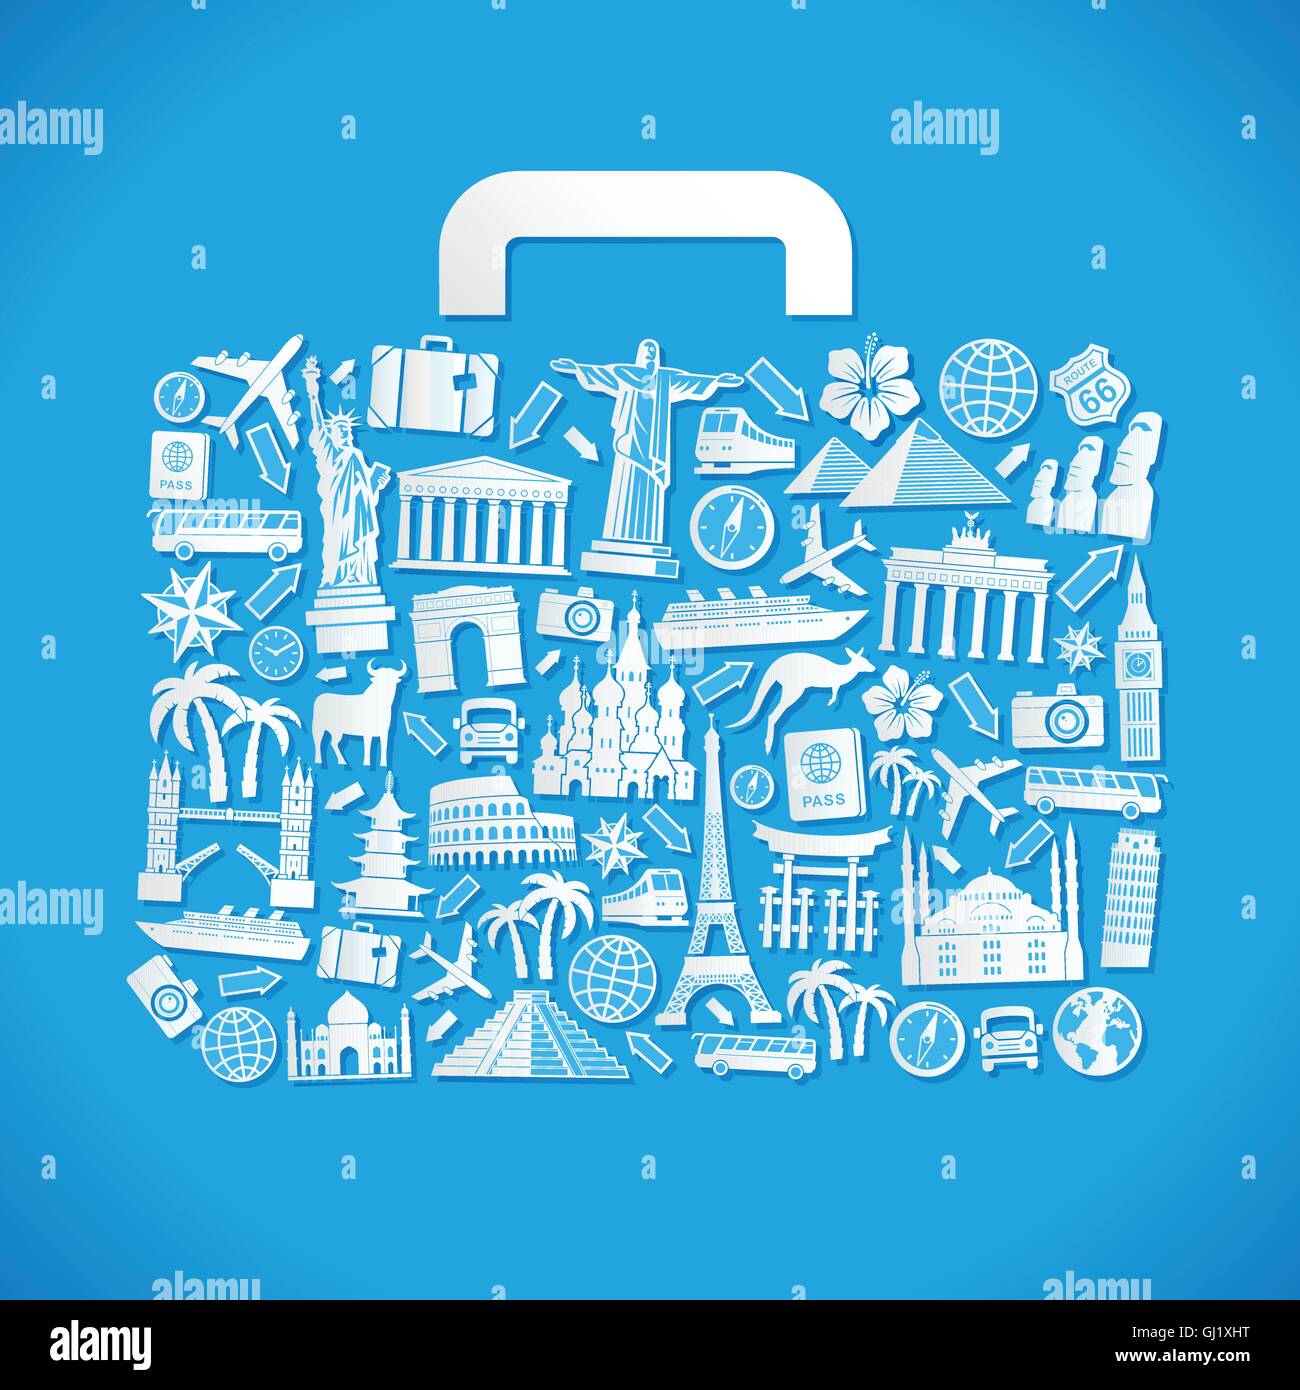 Vector Illustration of a luggage composed of travel icons and famous monuments Stock Vector